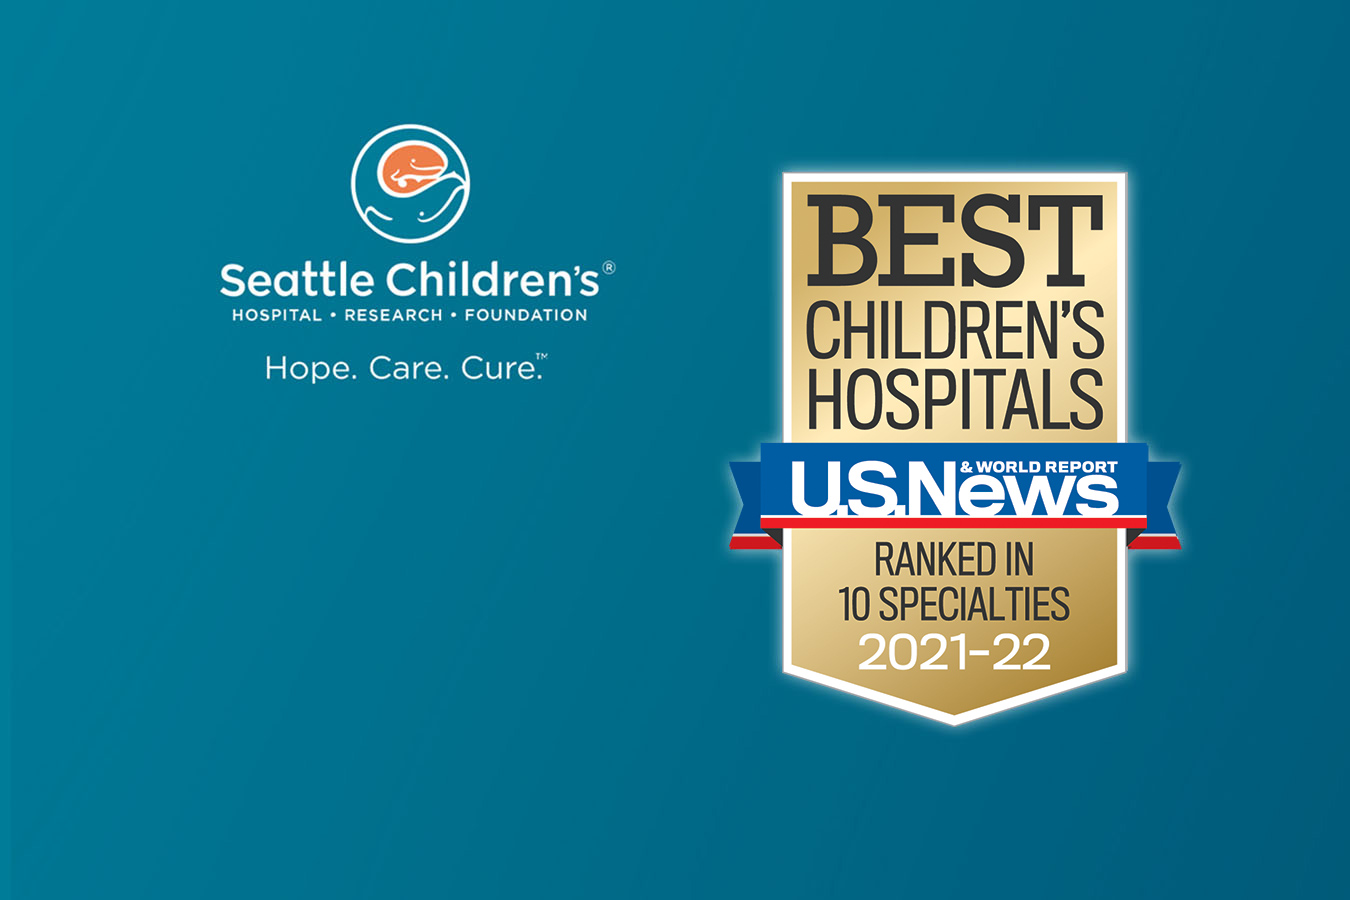 A badge showing Seattle Children's award from U.S. News & World Report for being ranked in 10 specialties for 2021-2022